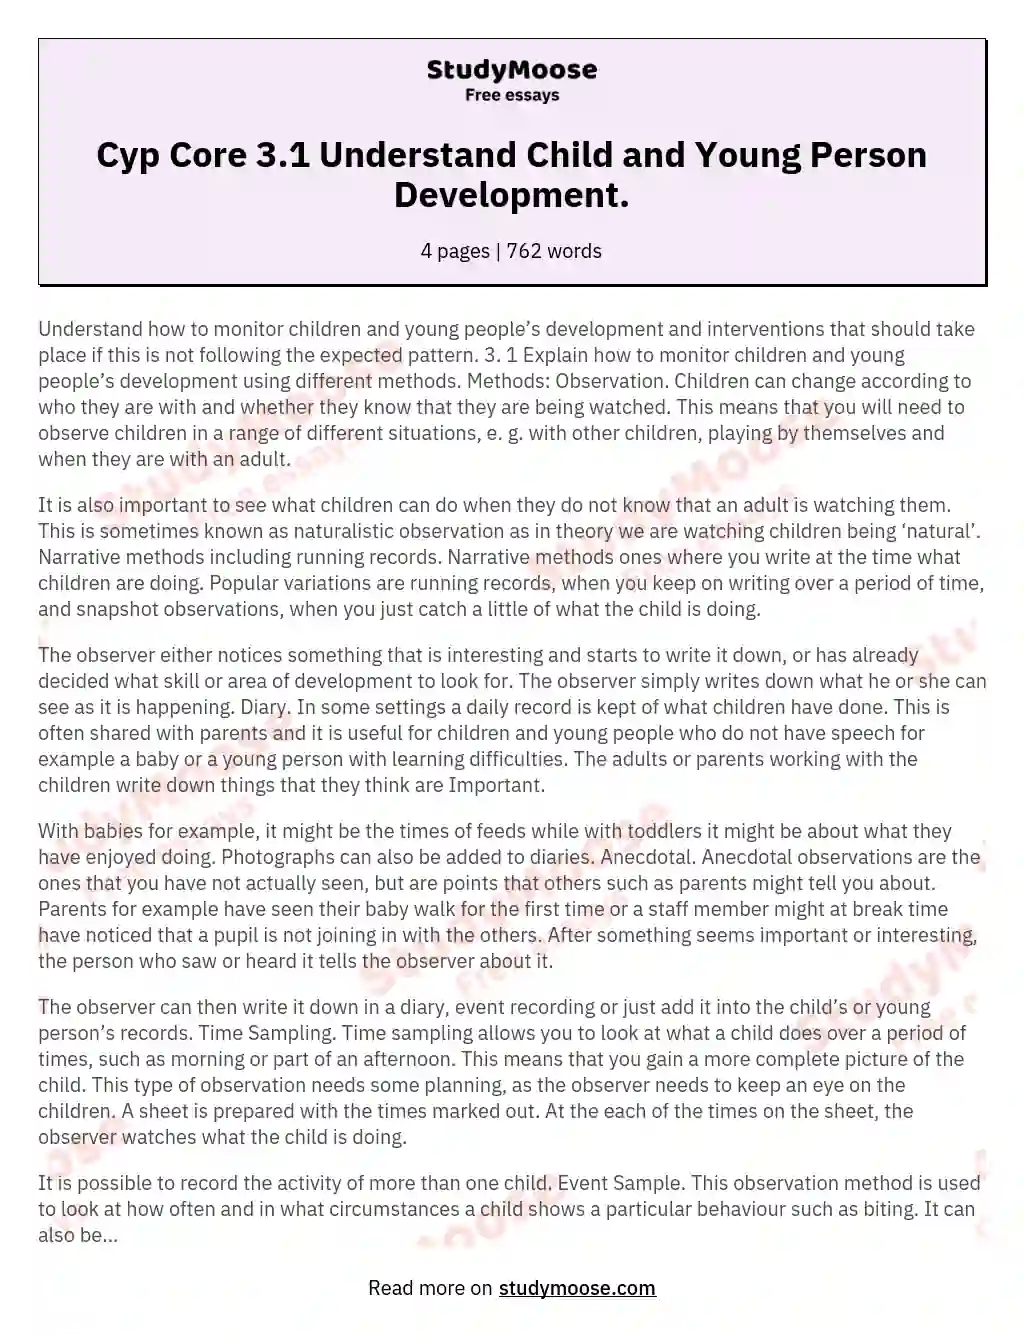 Cyp Core 3.1 Understand Child and Young Person Development. essay